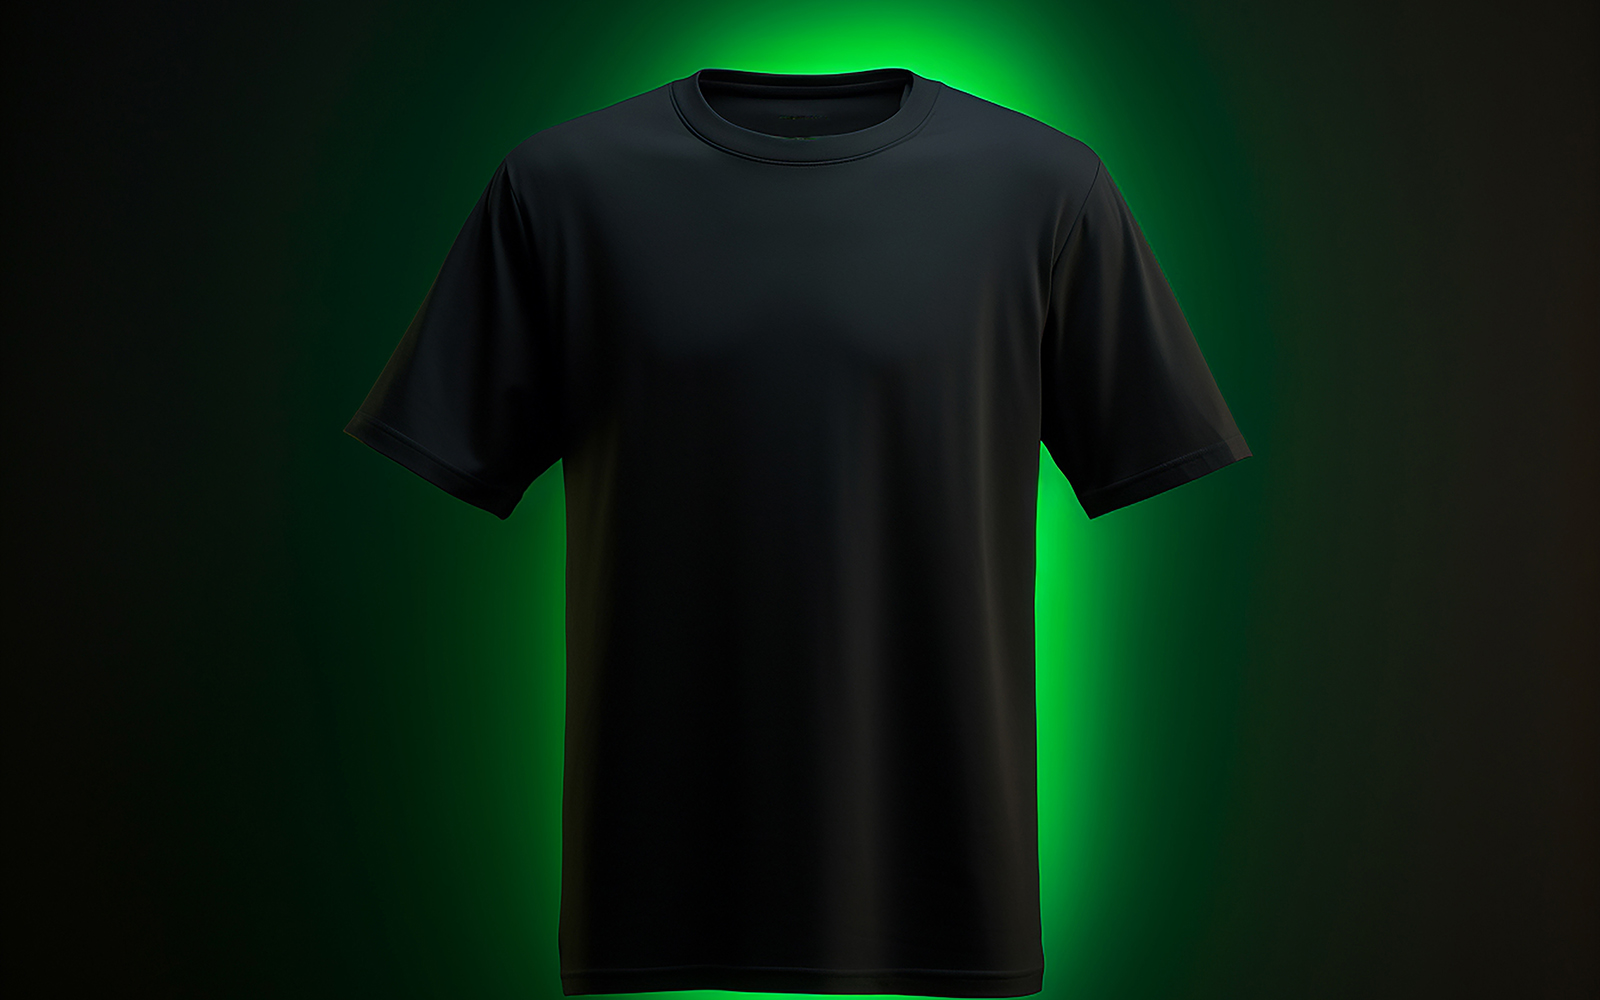 Blank t-shirt on the neon light_black t-shirt on the neon action